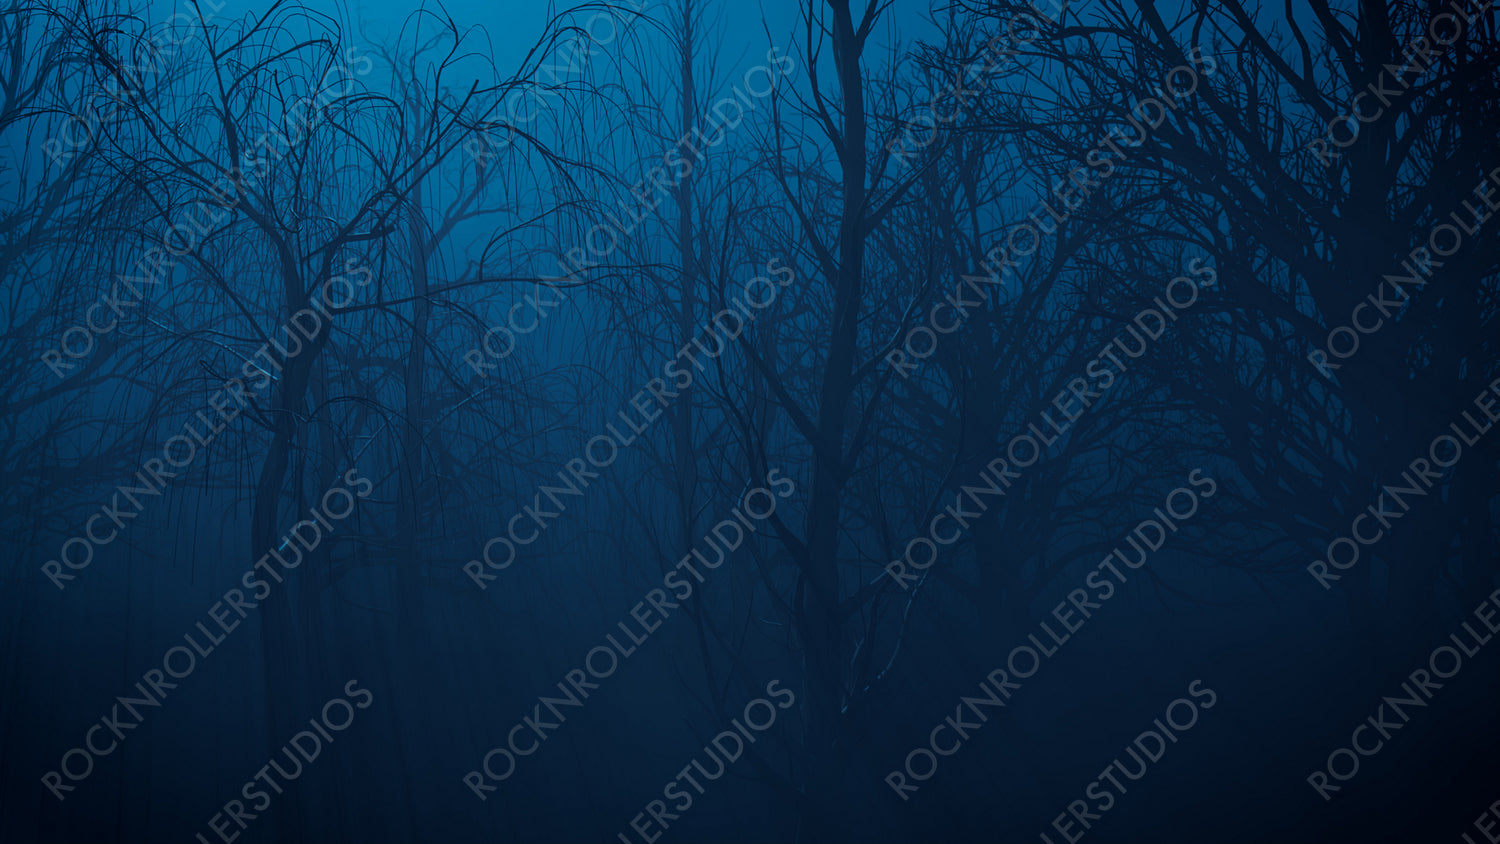 Trees in Spooky Woodland. Halloween background.